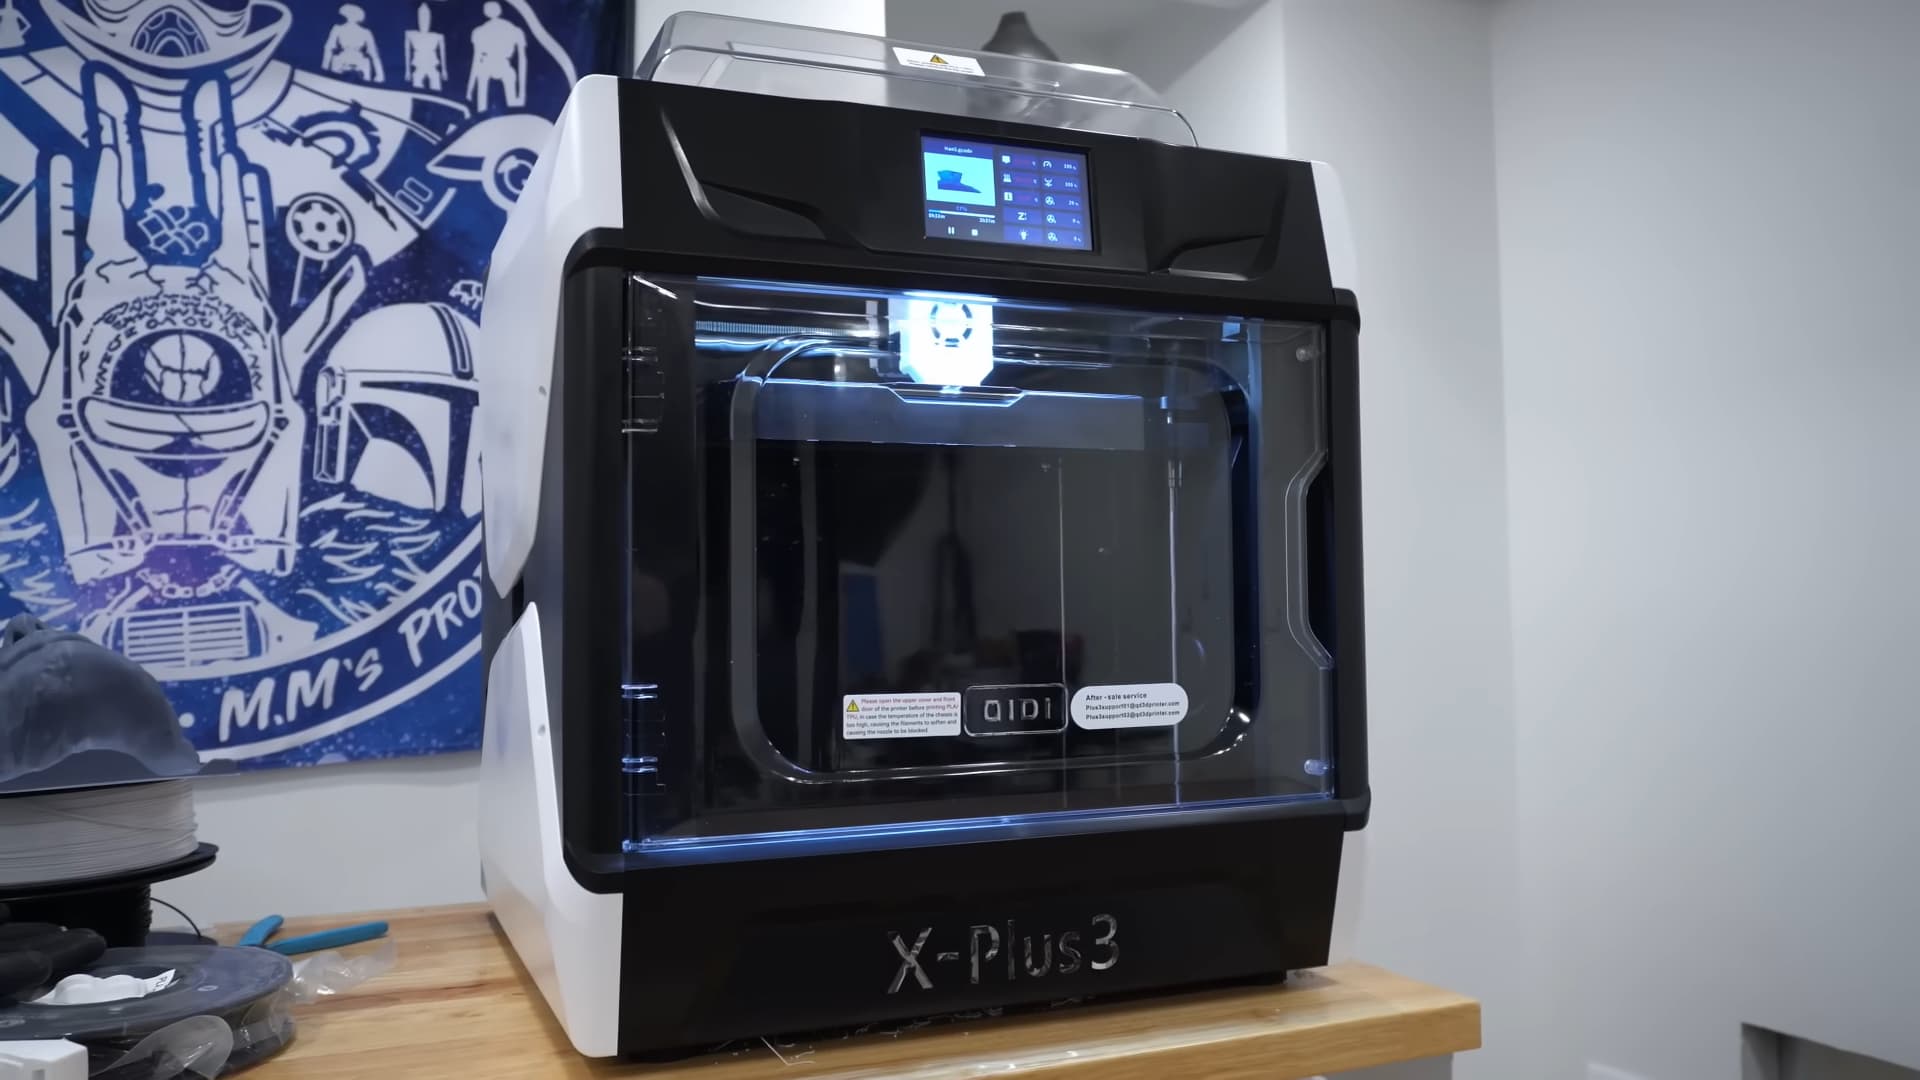 Is It Safe to Leave a 3D Printer Running?